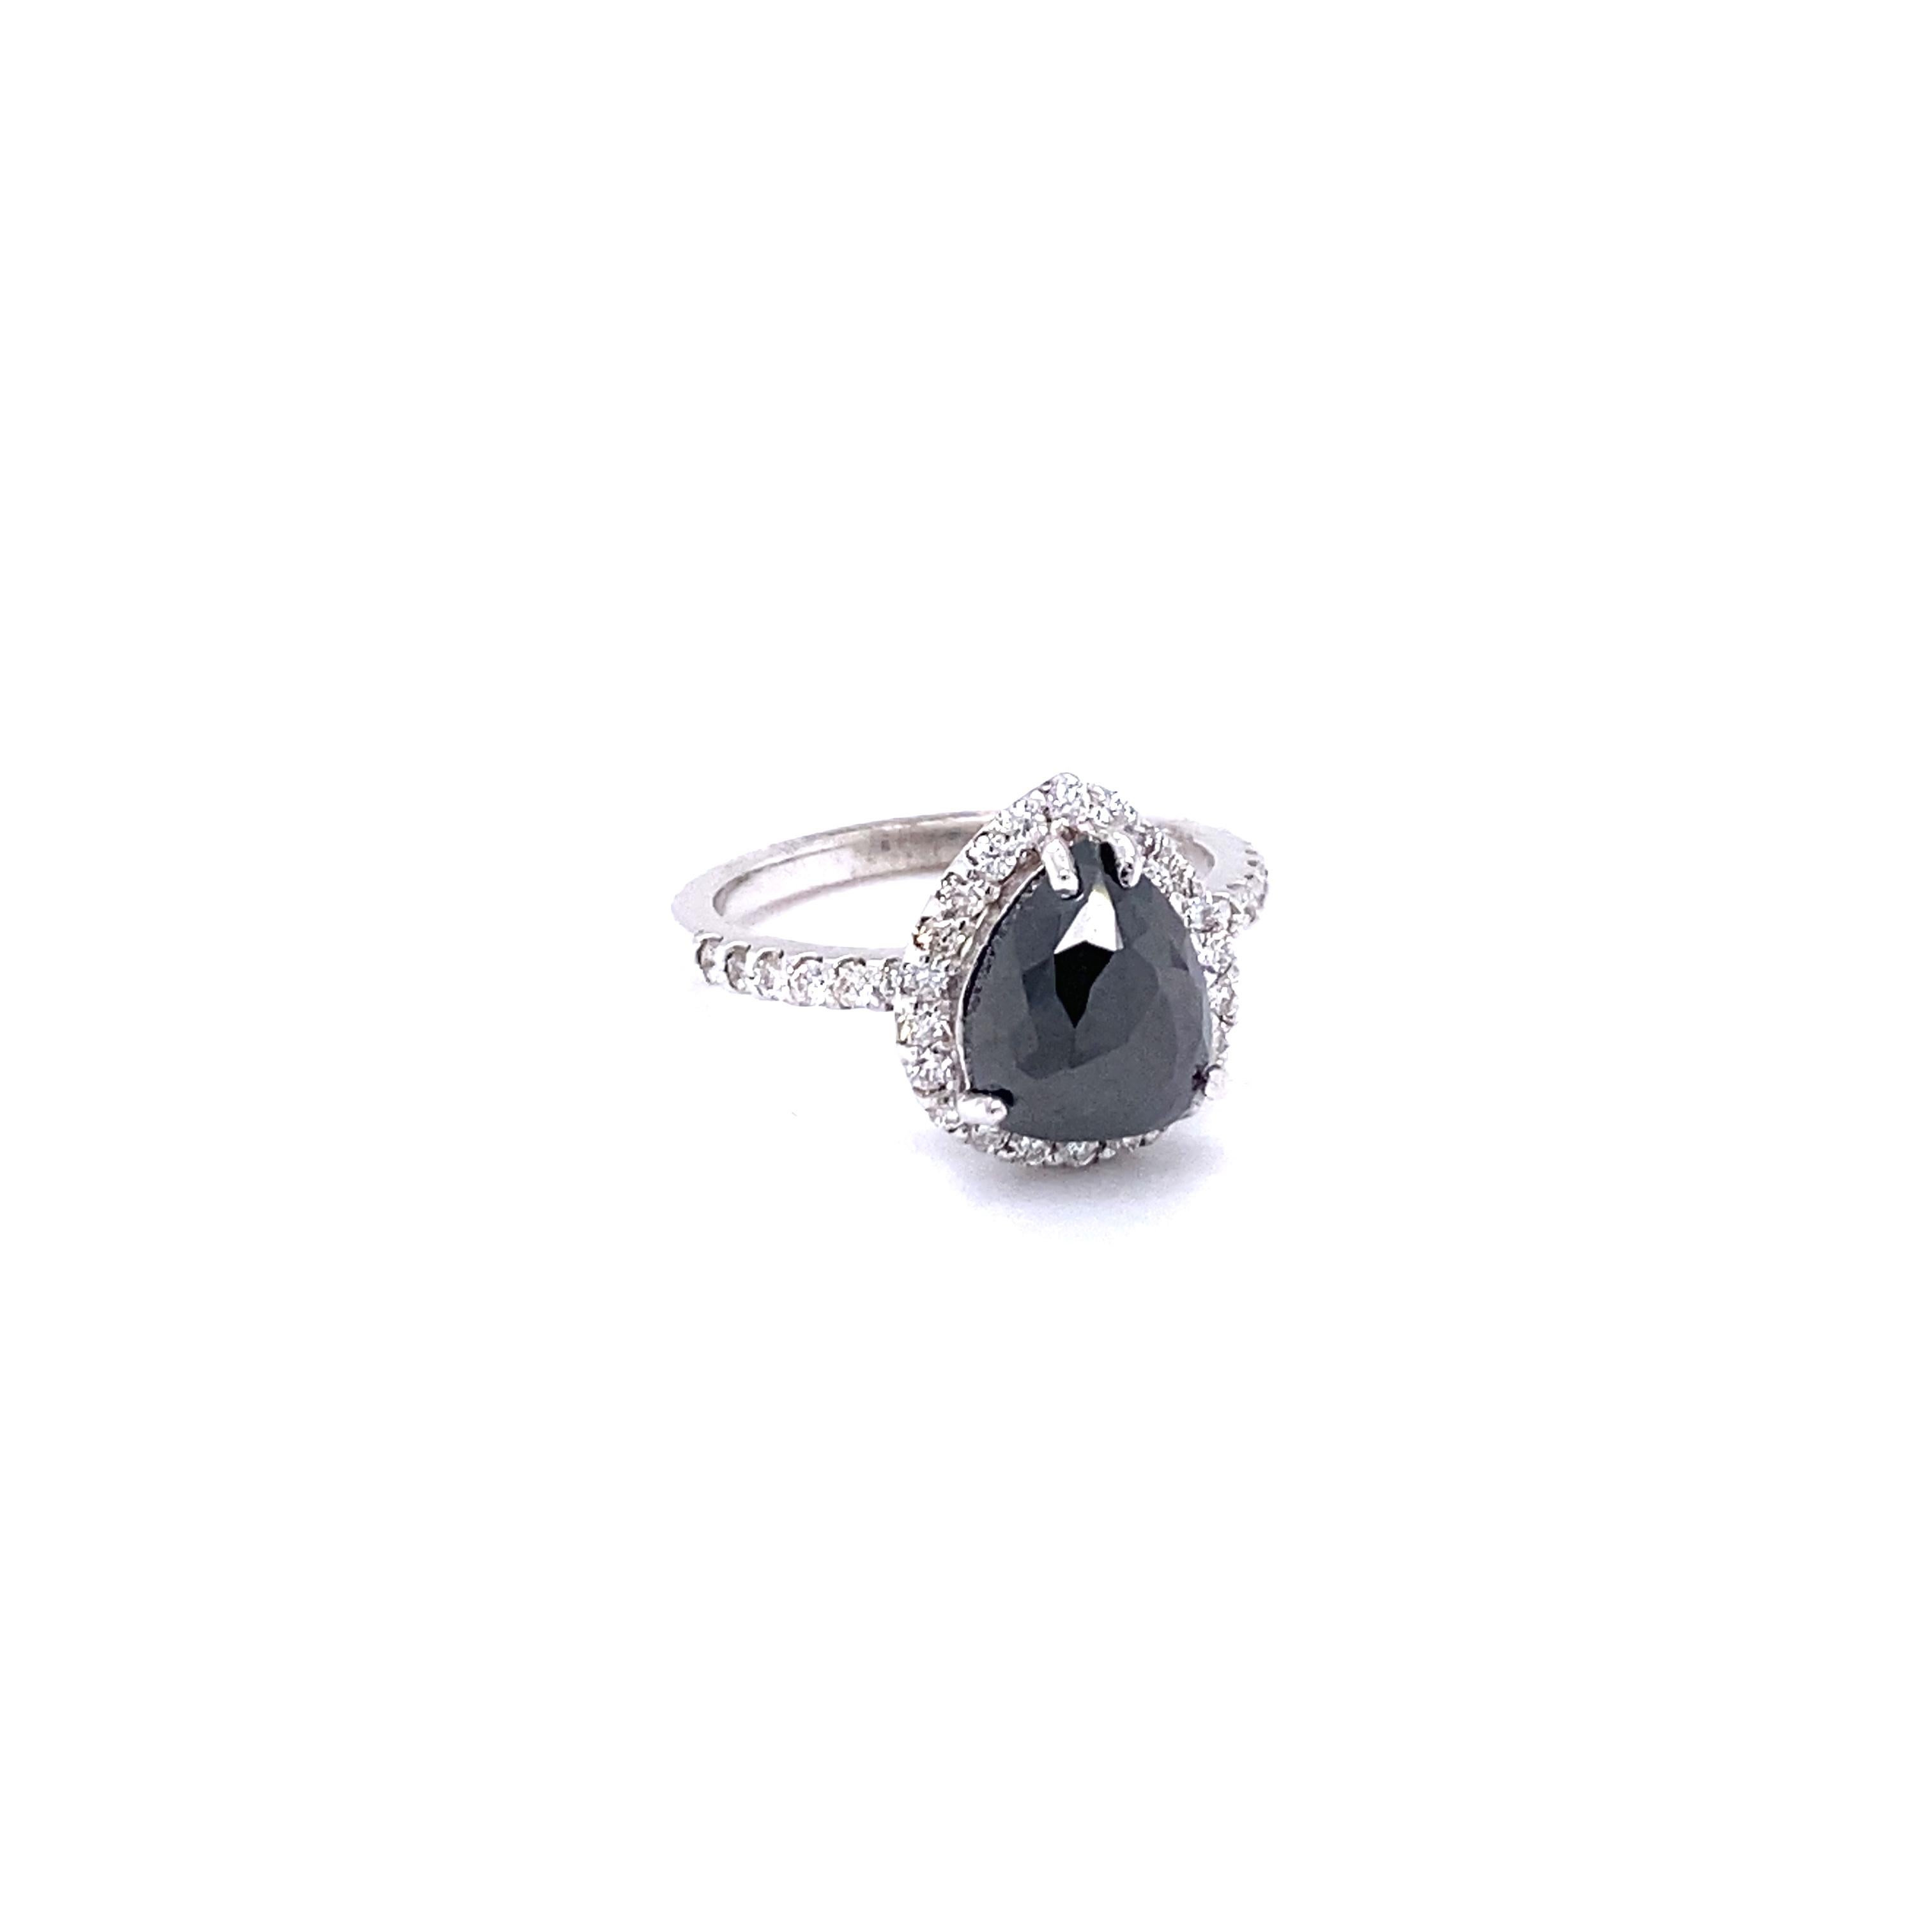 Pear Cut Black and White Diamond Engagement Ring
Description as follows:

Pear Cut Dia weighs 2.43 carats and measures at 10 mm x 8 mm
34 Round Cut Diamonds weigh 0.49 carats (Clarity: SI, Color: F)
14 Karat White Gold approximately 3.4 grams
 Ring